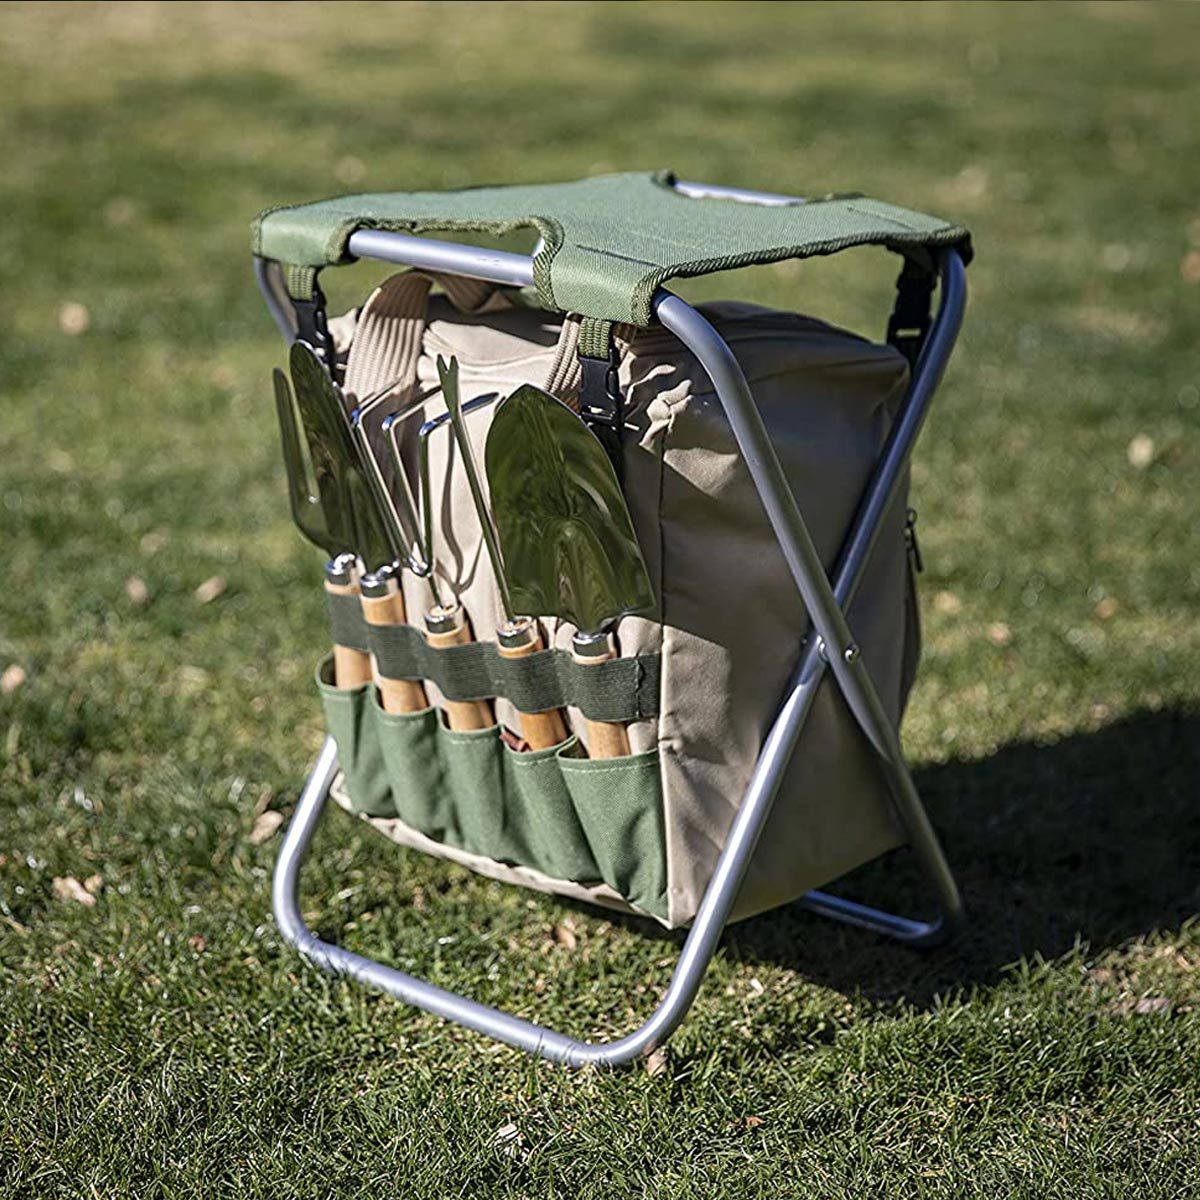 20 Perfect Lawn And Gardening Gifts For Father’s Day